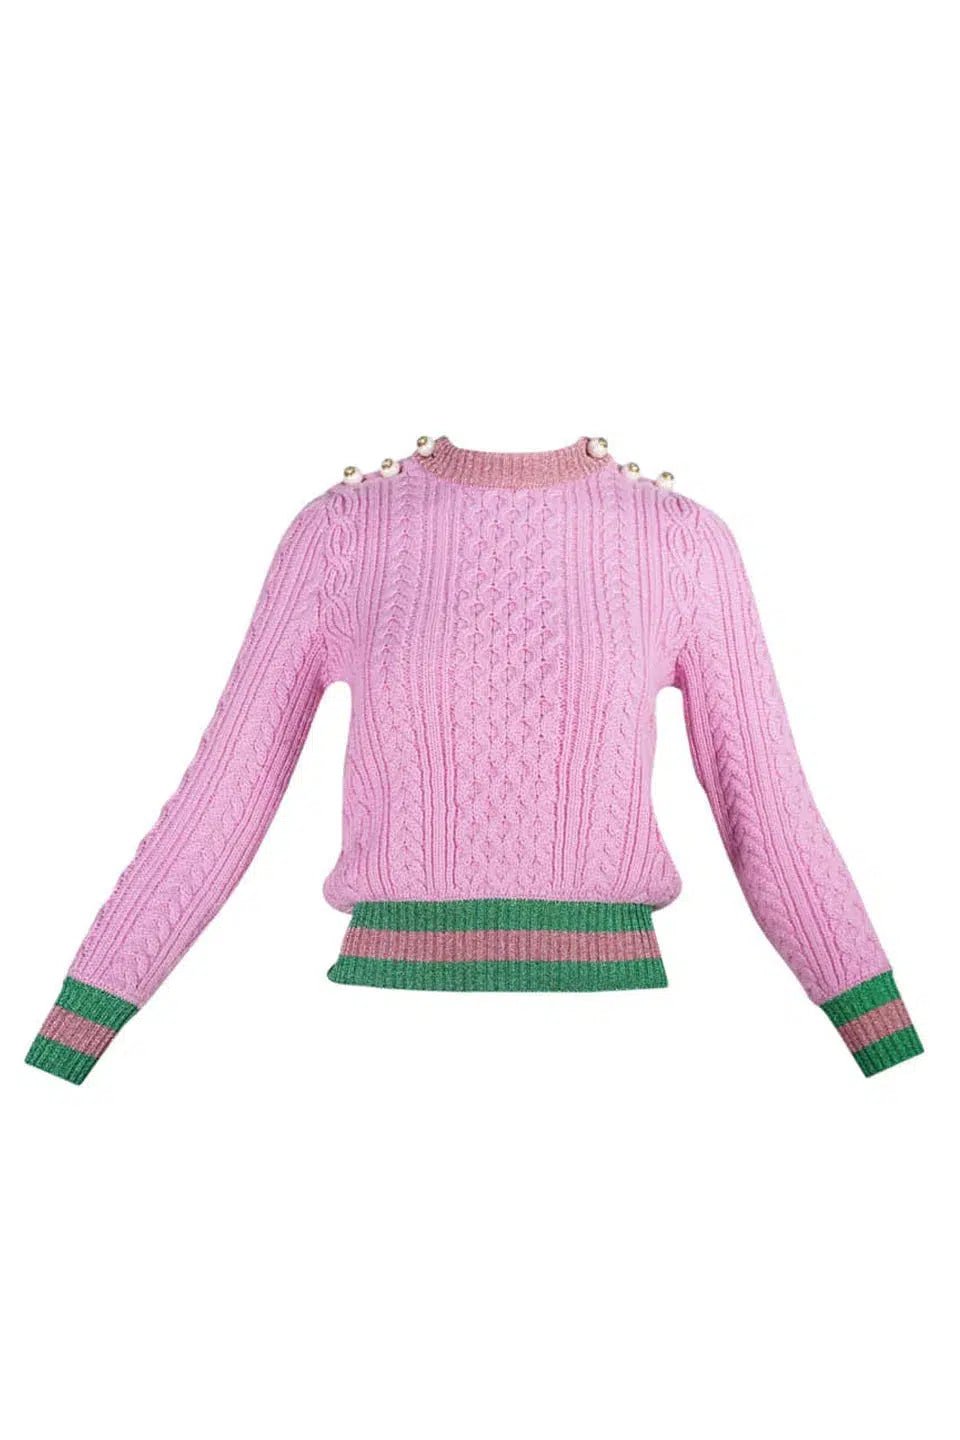 Gucci by Alessandro Michel Pink Knit Sweater with Pearl GG Buttons Size XS - Foxy Couture Carmel